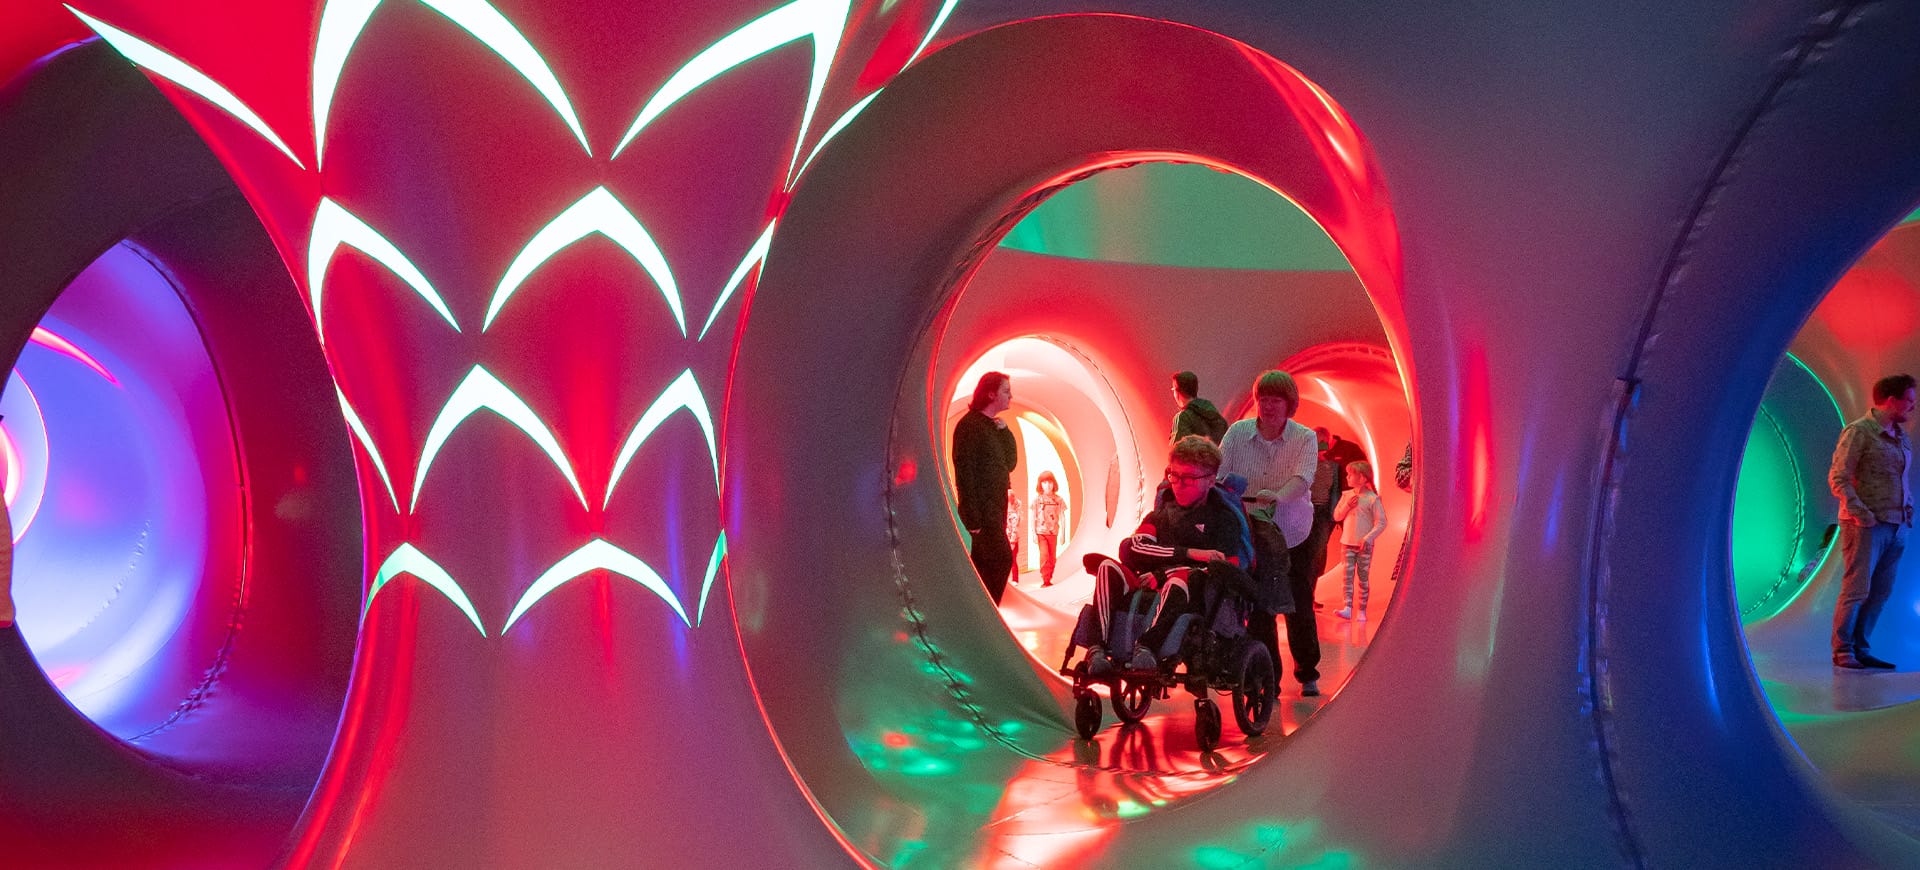 Mum pushing boy in wheelchair through luminarium, which is glowing shades of pink, blue and green.